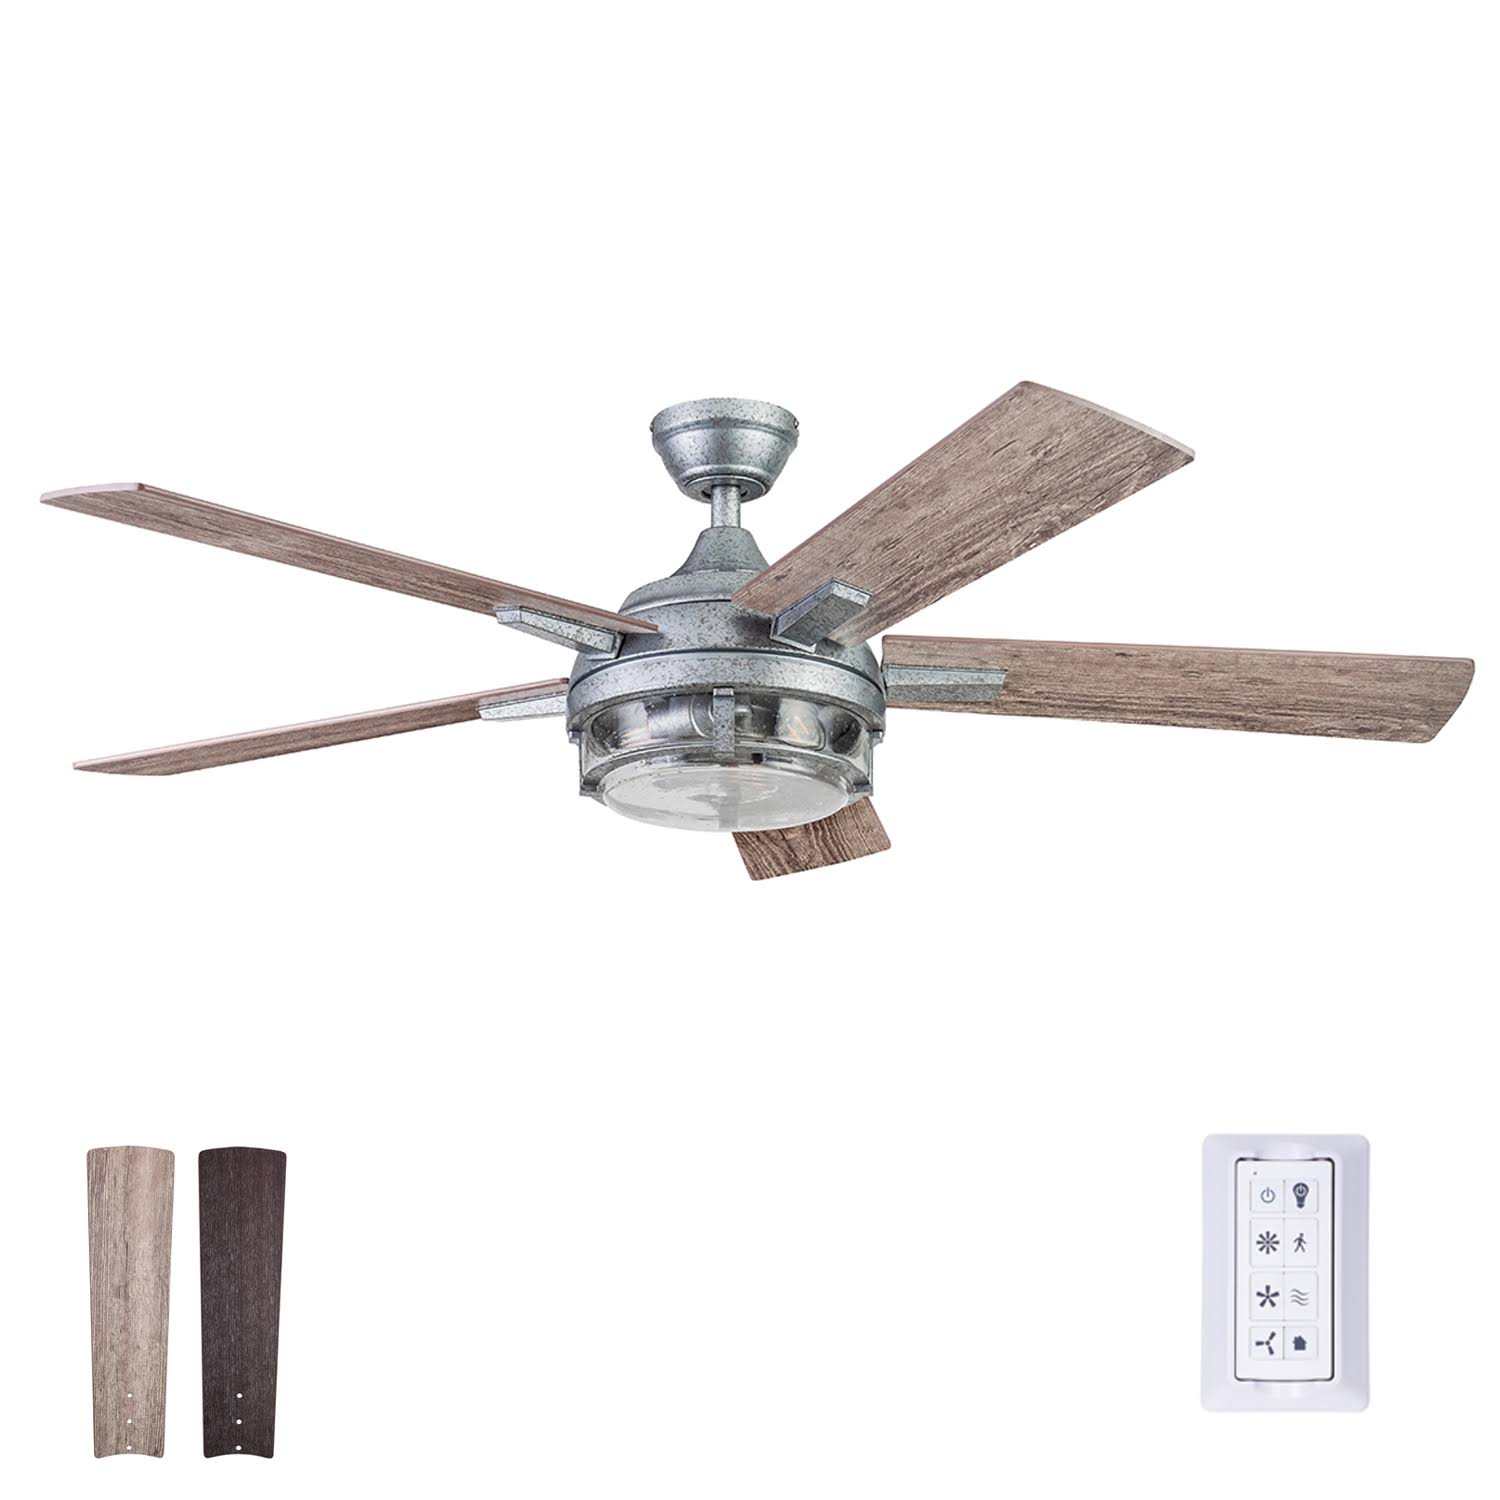 52" Freyr, Galvanized, Remote Control, Indoor/Outdoor Ceiling Fan | Prominence Home